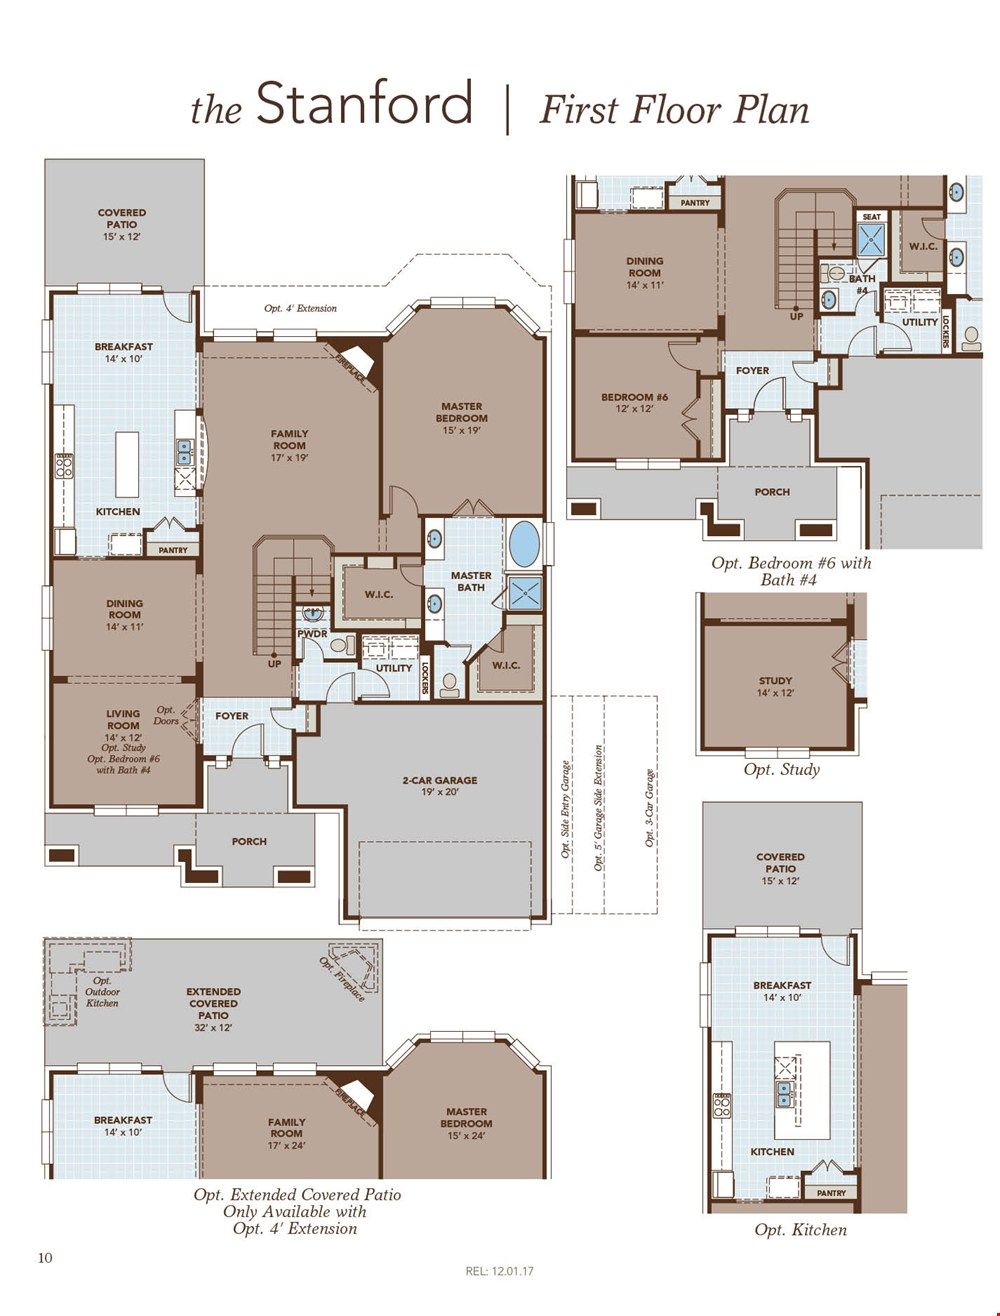 Stanford First Floor Plan Floor plans, Patio room, New homes